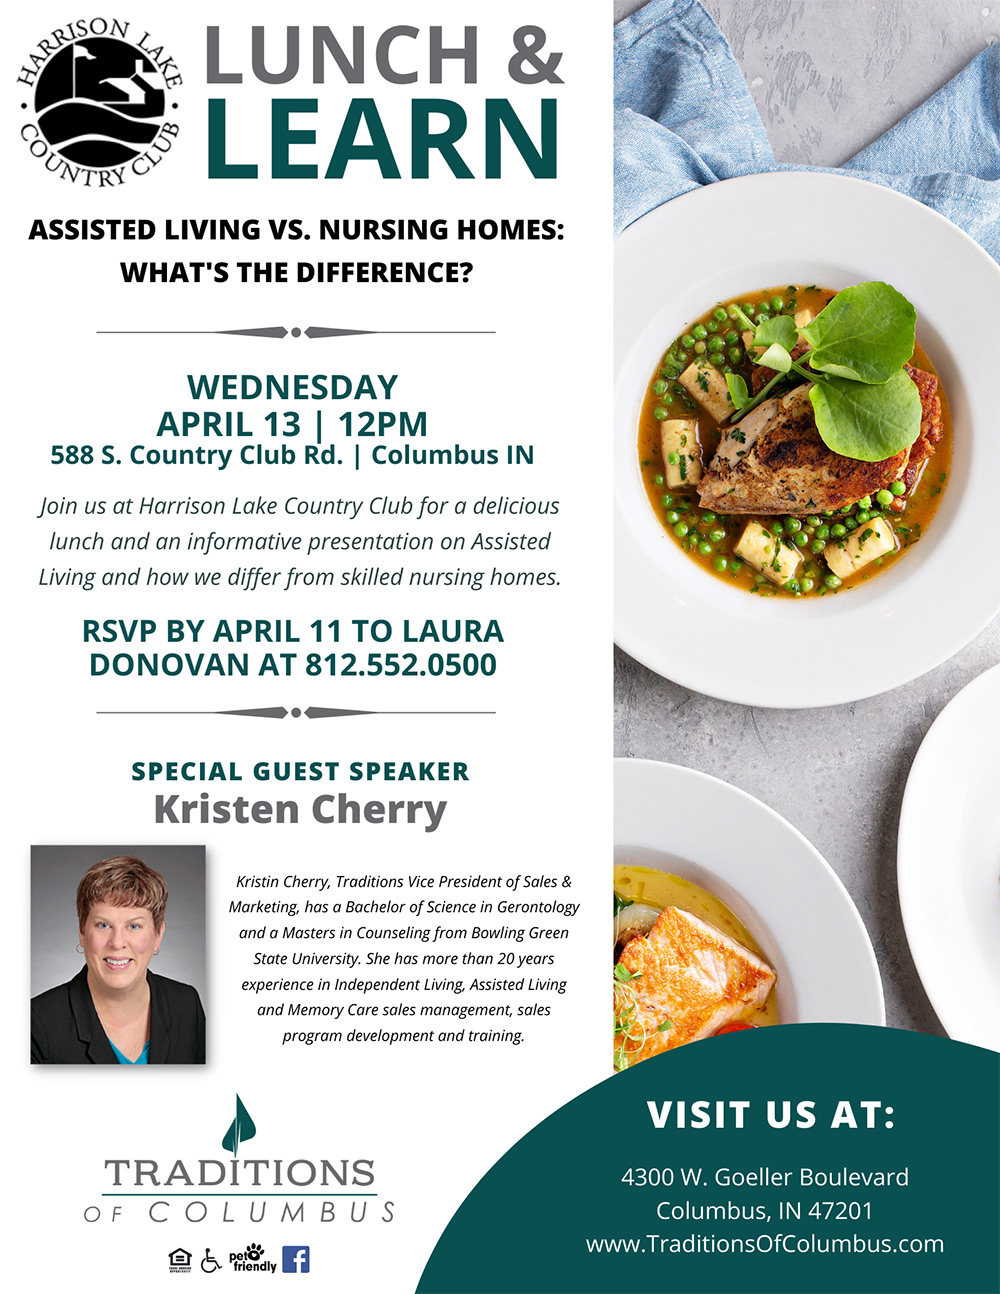 Lunch & Learn...Assisted Living vs. Nursing Homes: What's the Difference?